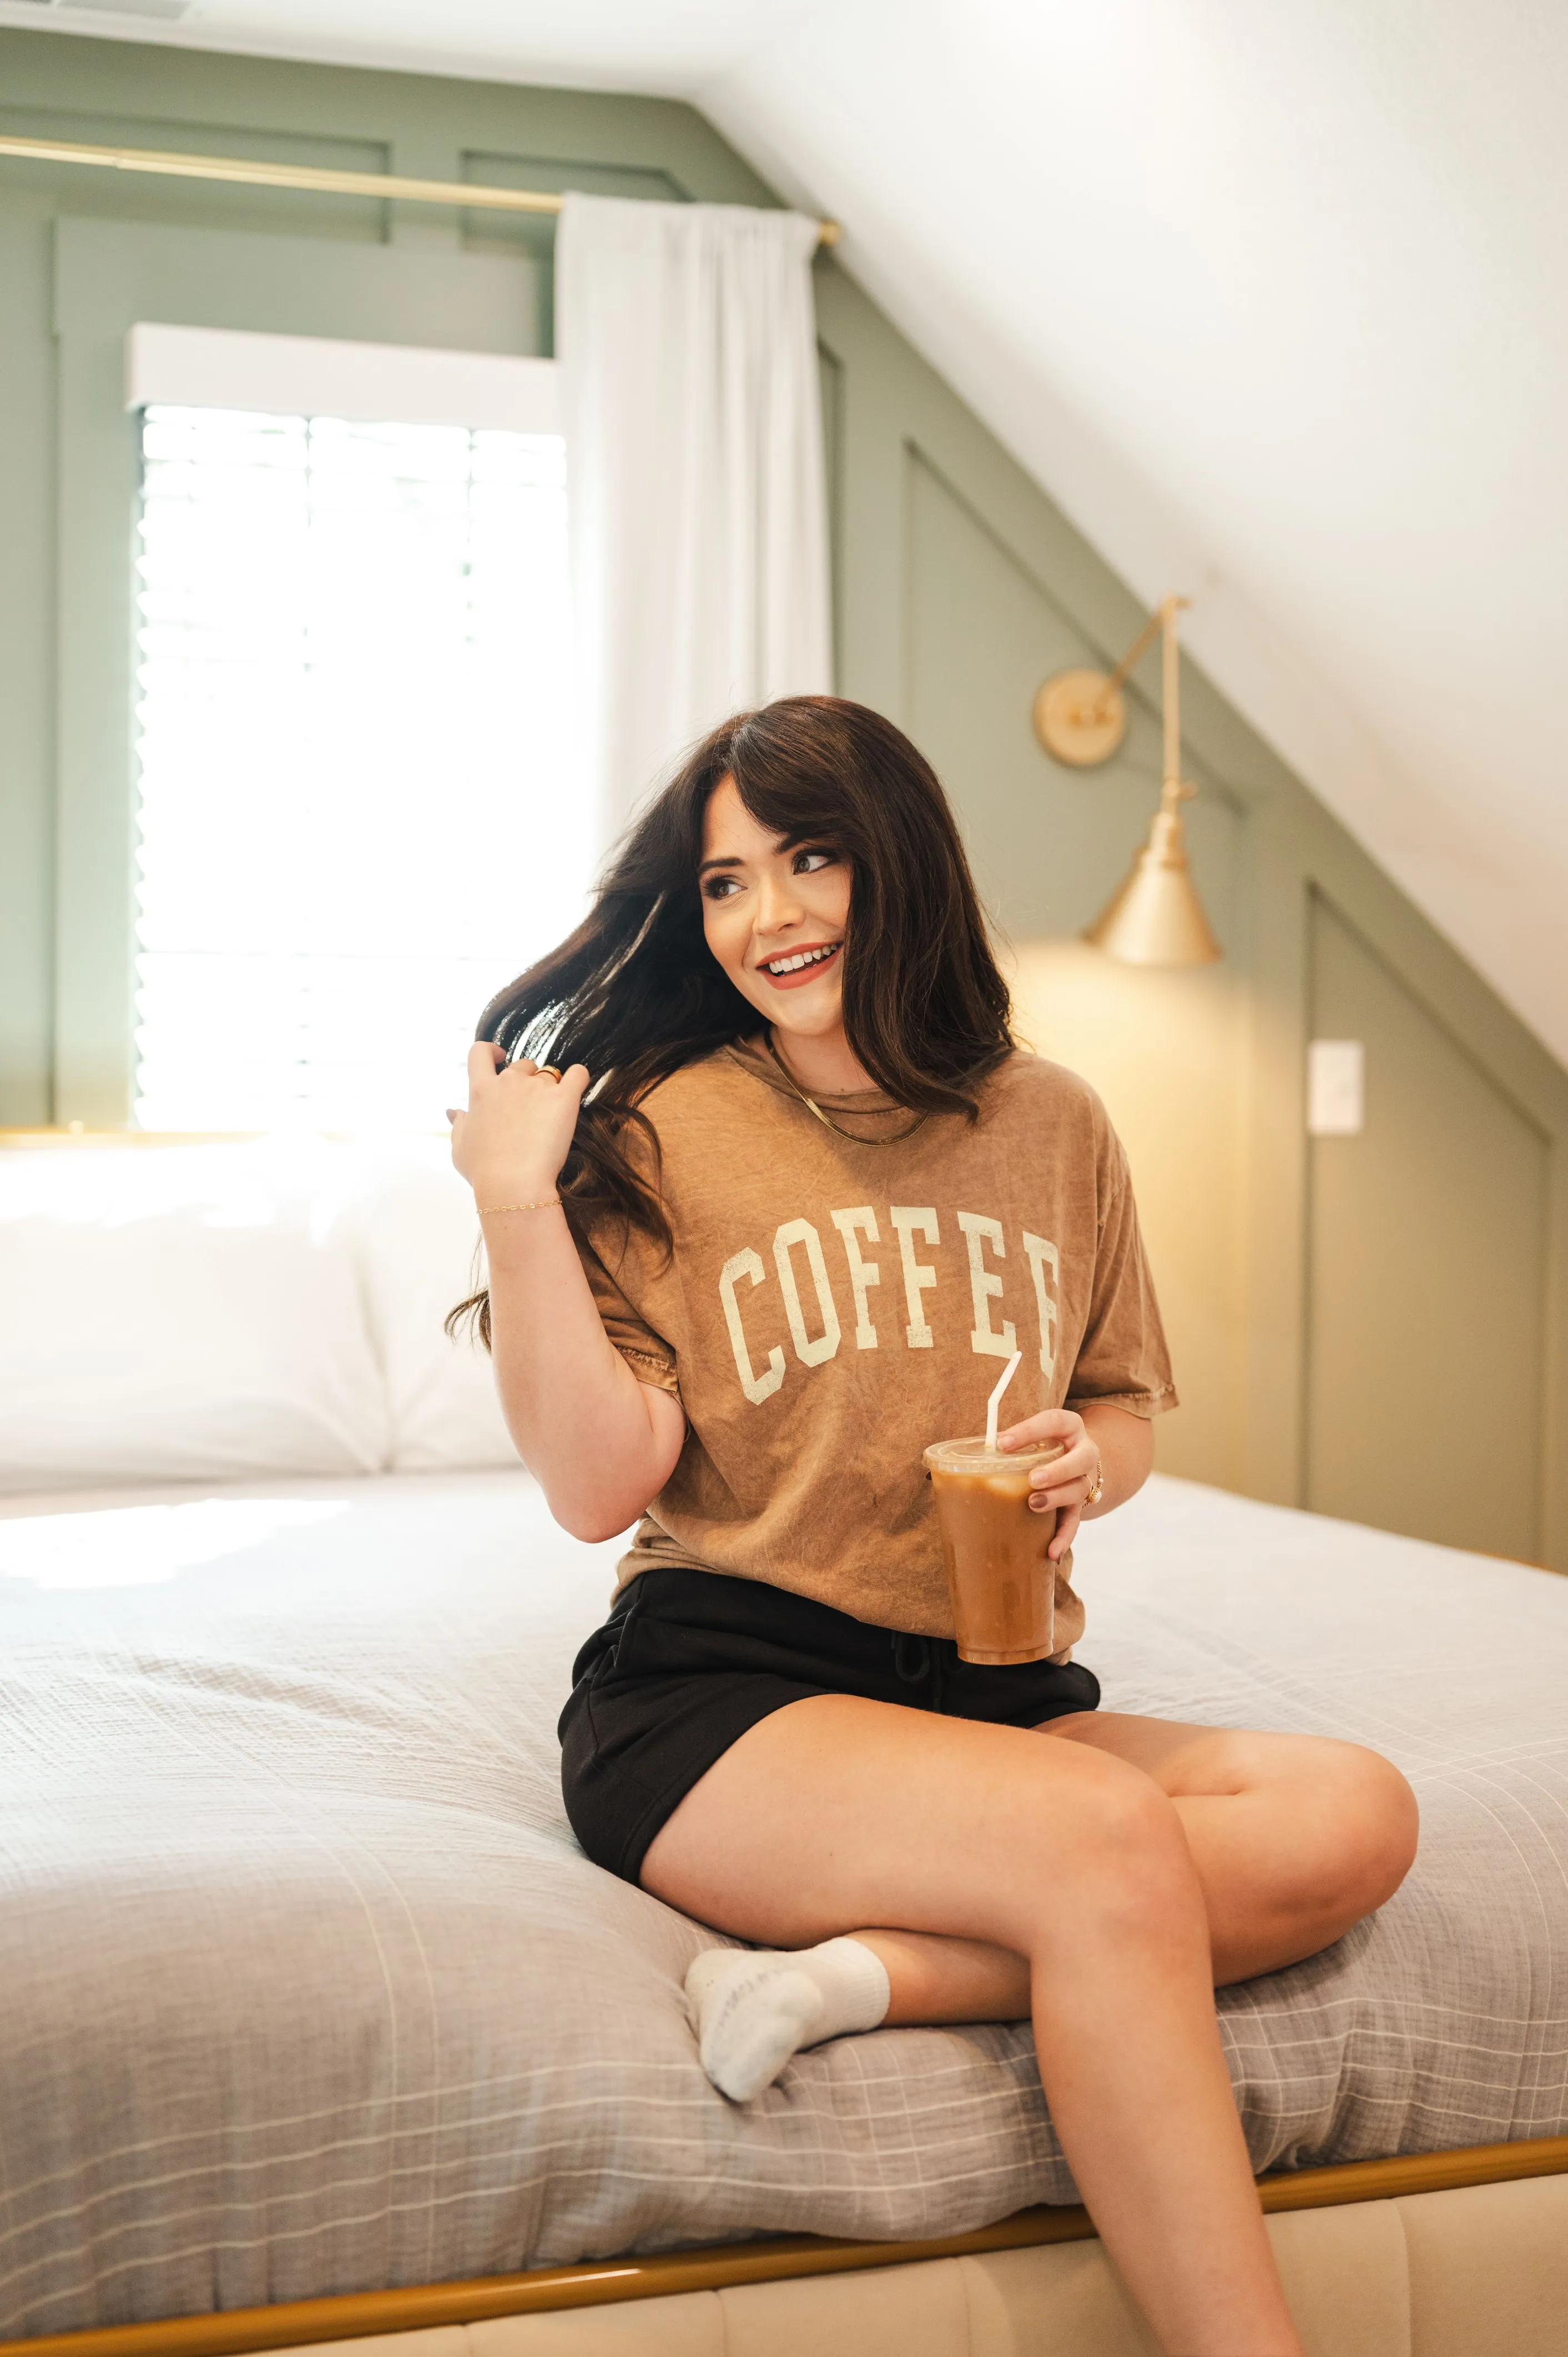 Young woman sitting on a bed holding an iced coffee and smiling, with a t-shirt that reads "COFFEE" in a brightly lit room.